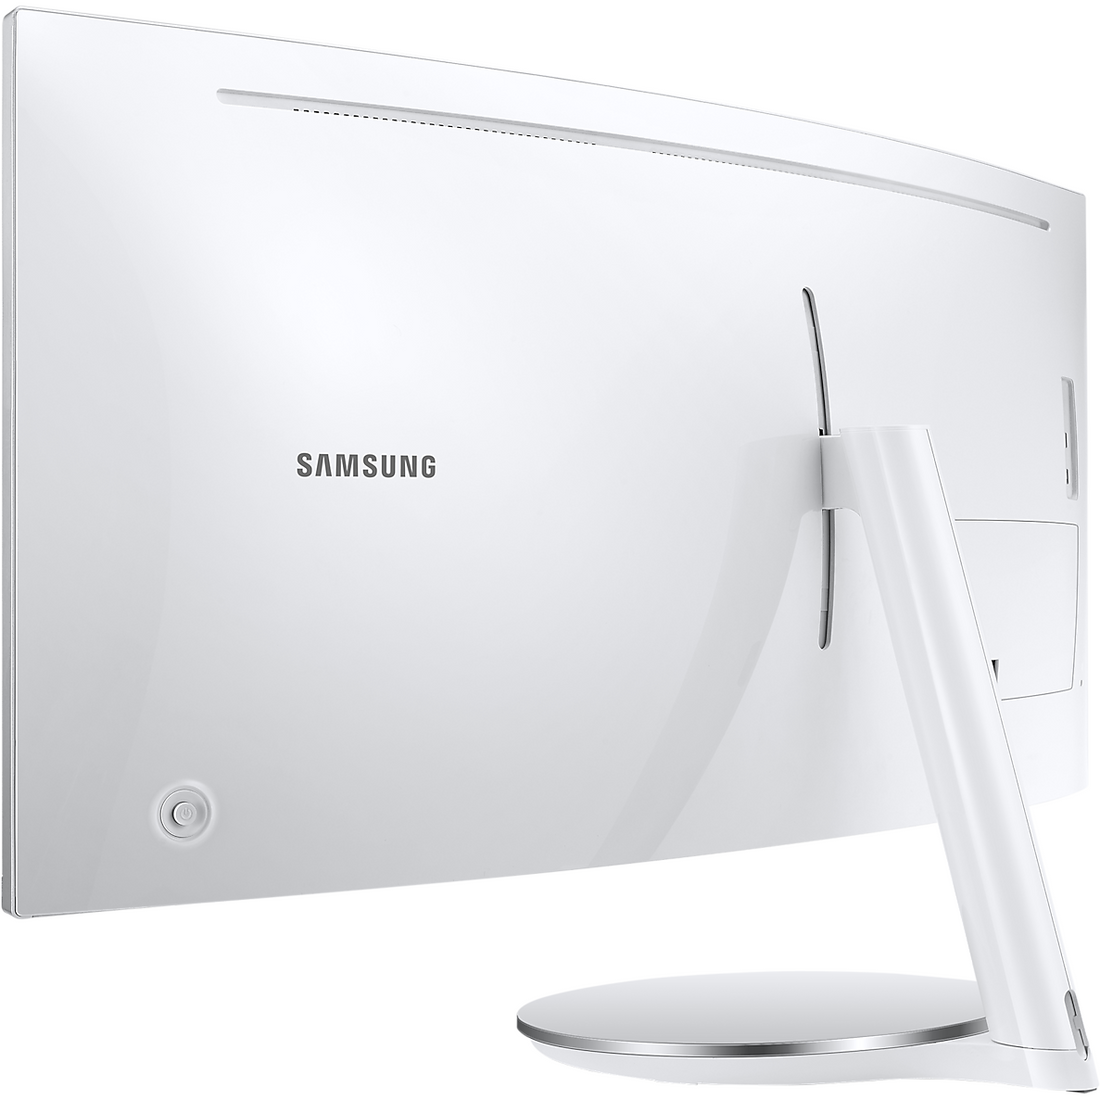 34 Inch Thunderbolt™ 3 Curved Ultra-Wide QHD Monitor